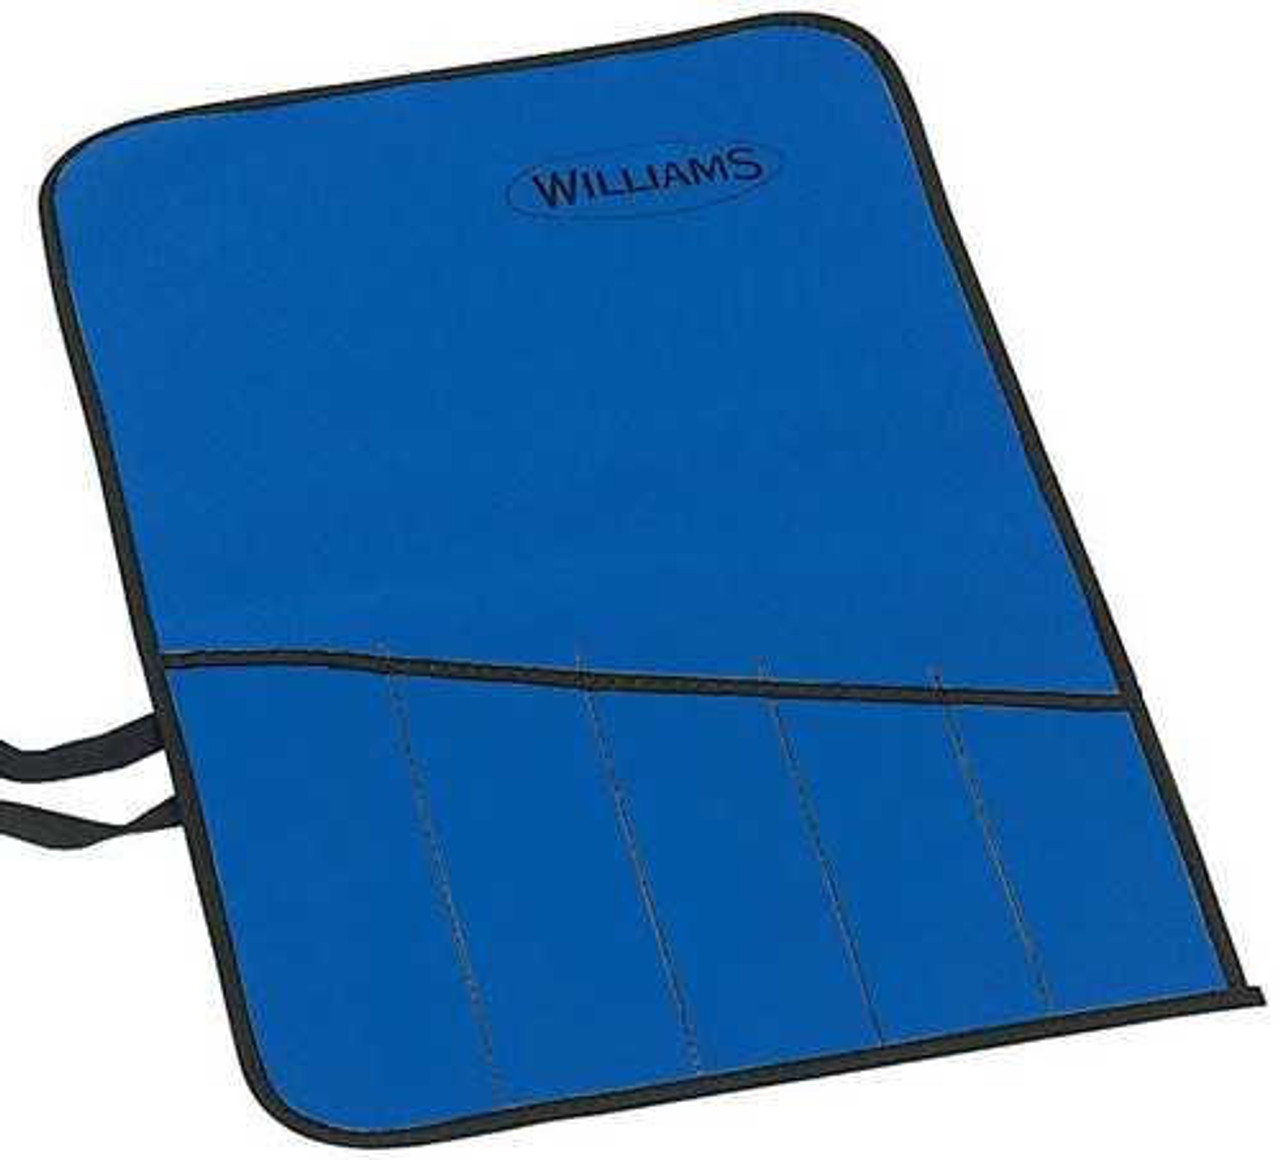 Williams 19 1/4" Williams Tool Pouch - 3 Pocket - R-48A 